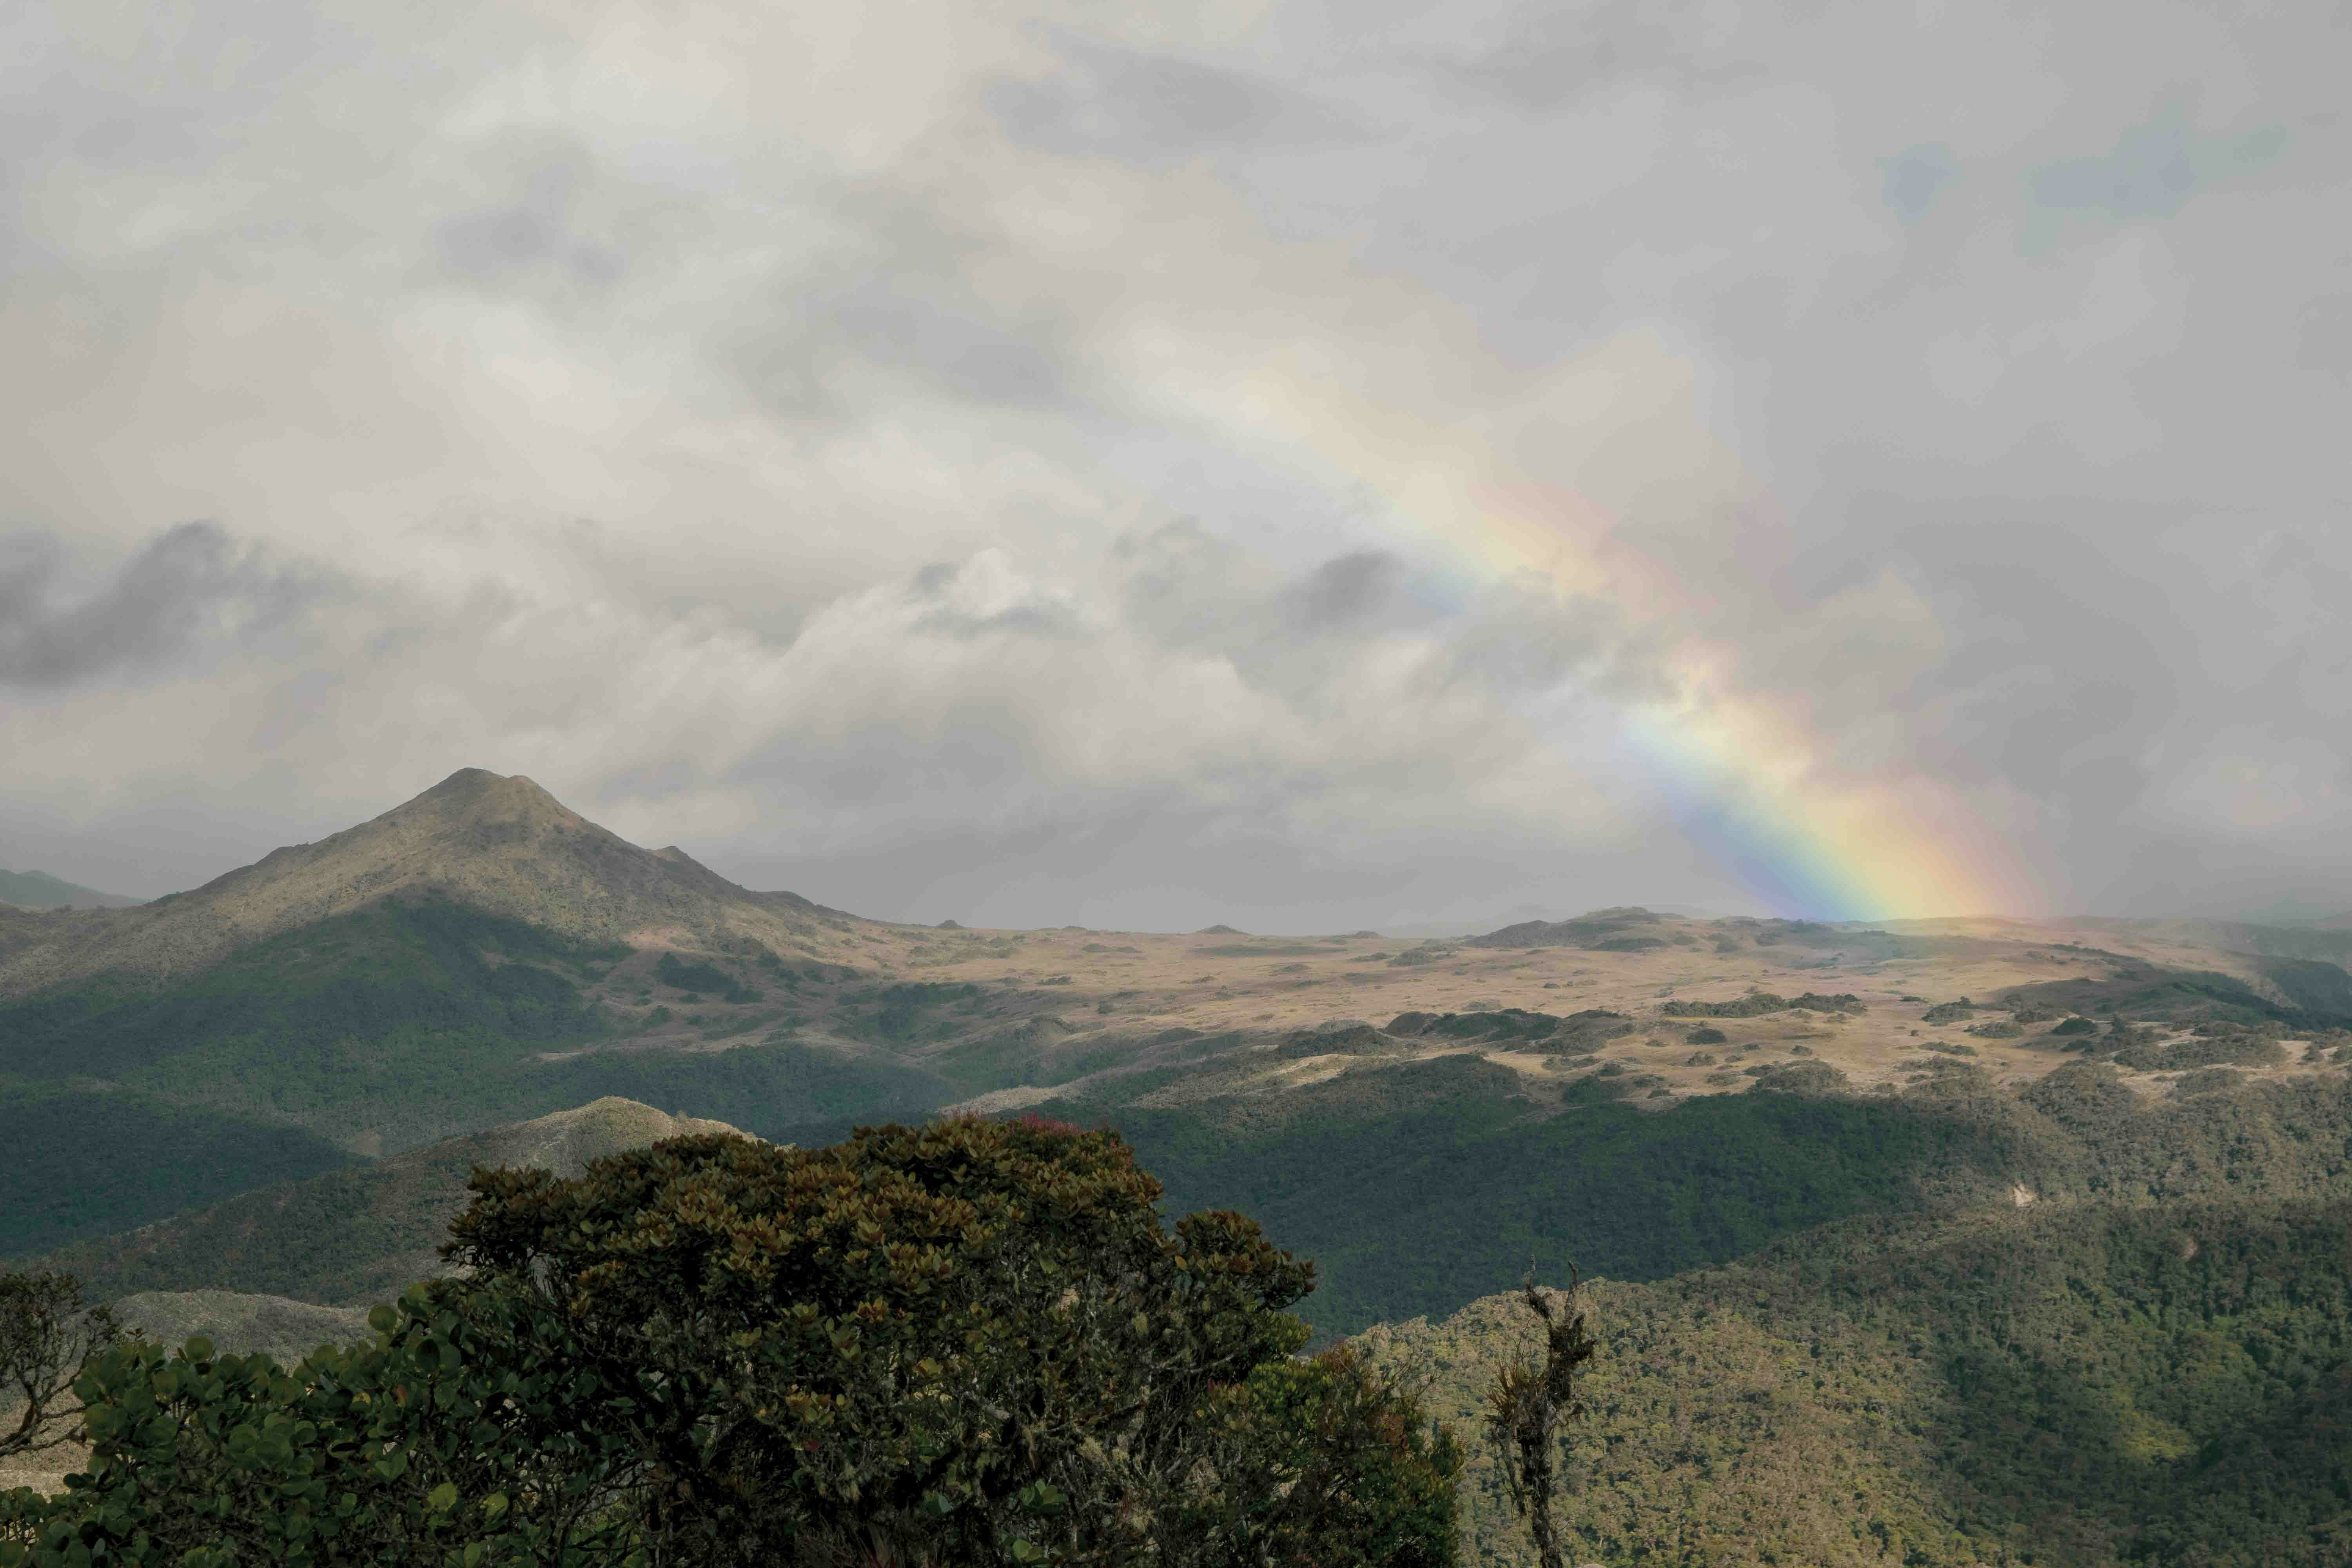 Went hiking to Tambo Blanco on June 21, the day of the Inti Raymi (Sun Dance), and was blessed with this wonderful sight.